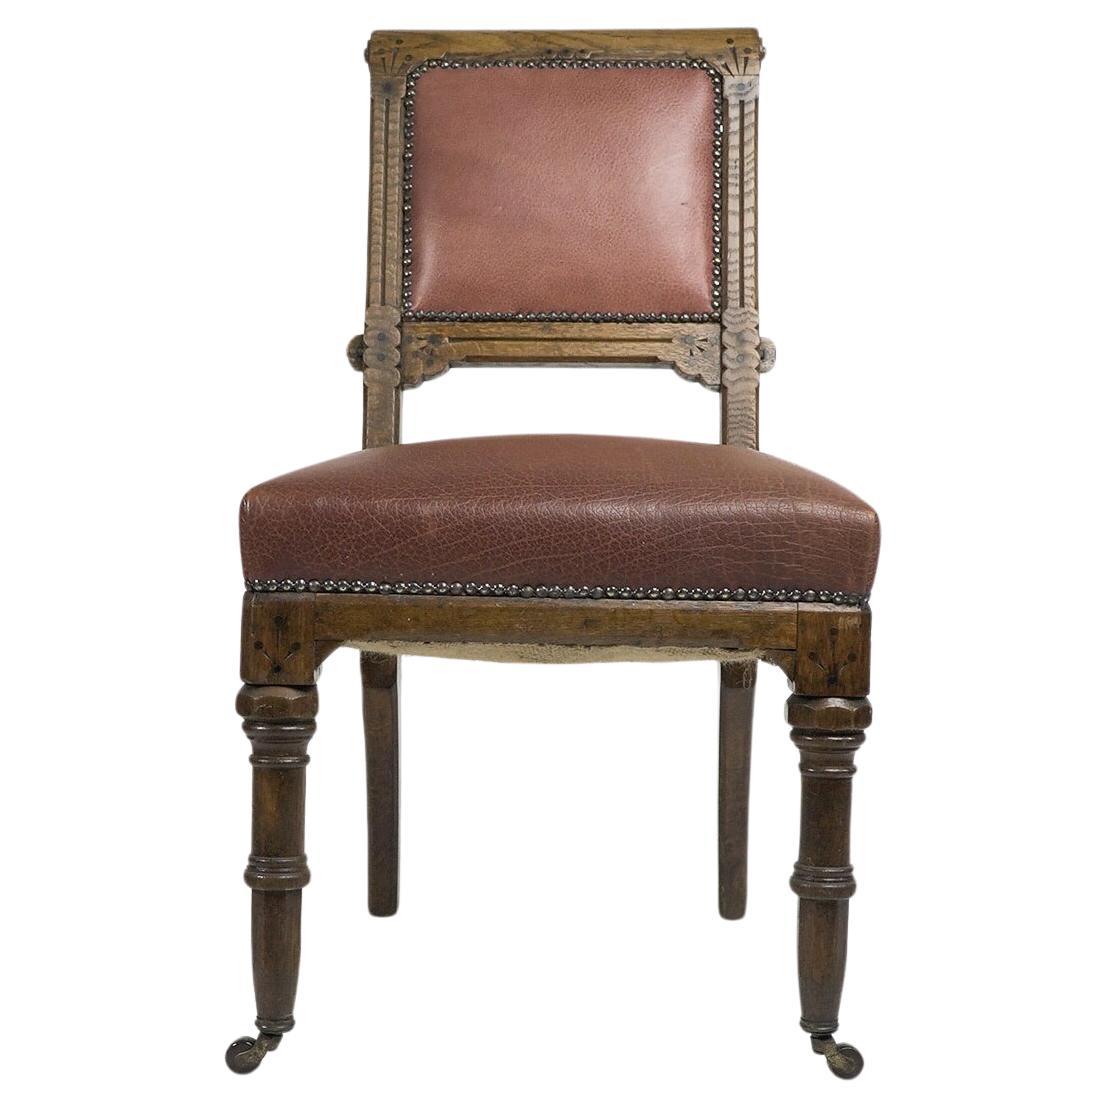 Charles Bevan attributed. A gothic Revival side chair with scroll carvings to the upper sides and incised decoration framing the backrest, with chamfered, and carved, and dot decoration, and again to the front seat corners. The ring turned legs have